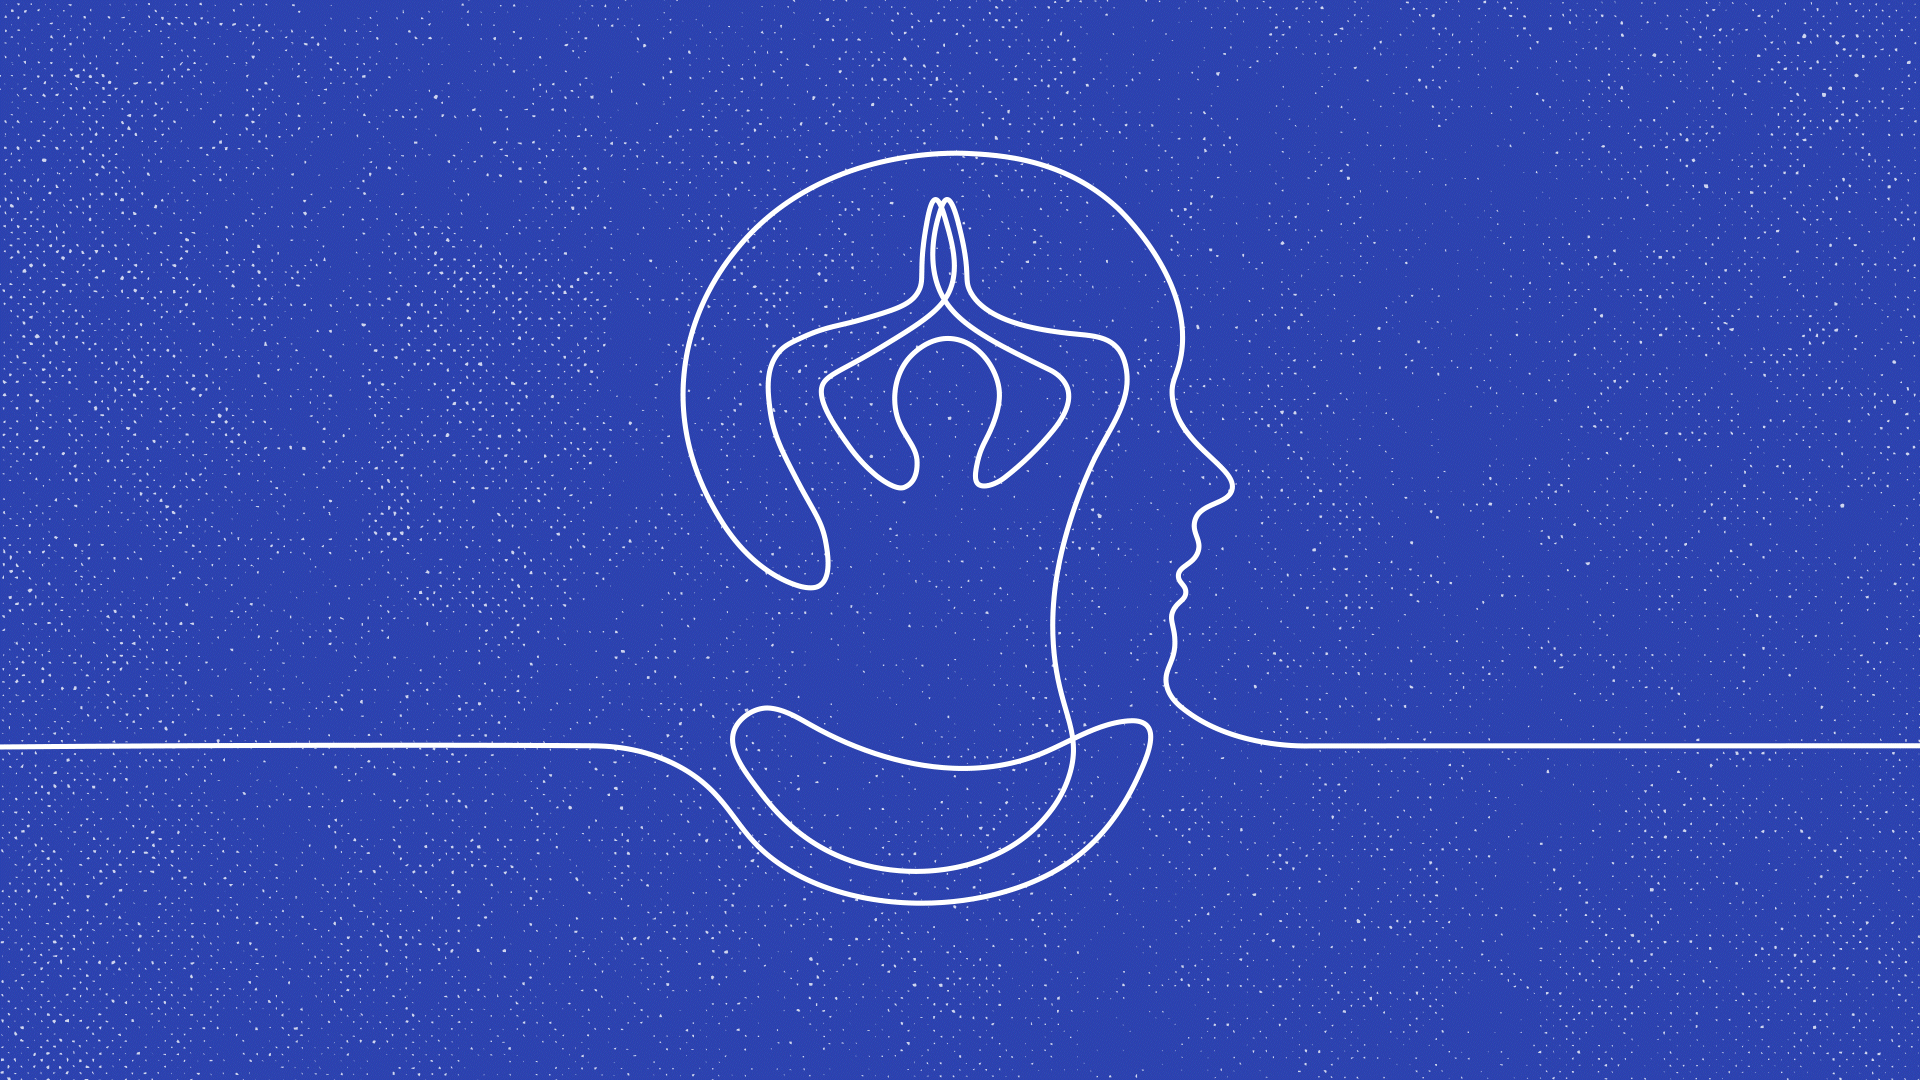 A GIF representing mindfulness -- an illustration of a yoga pose inside a head